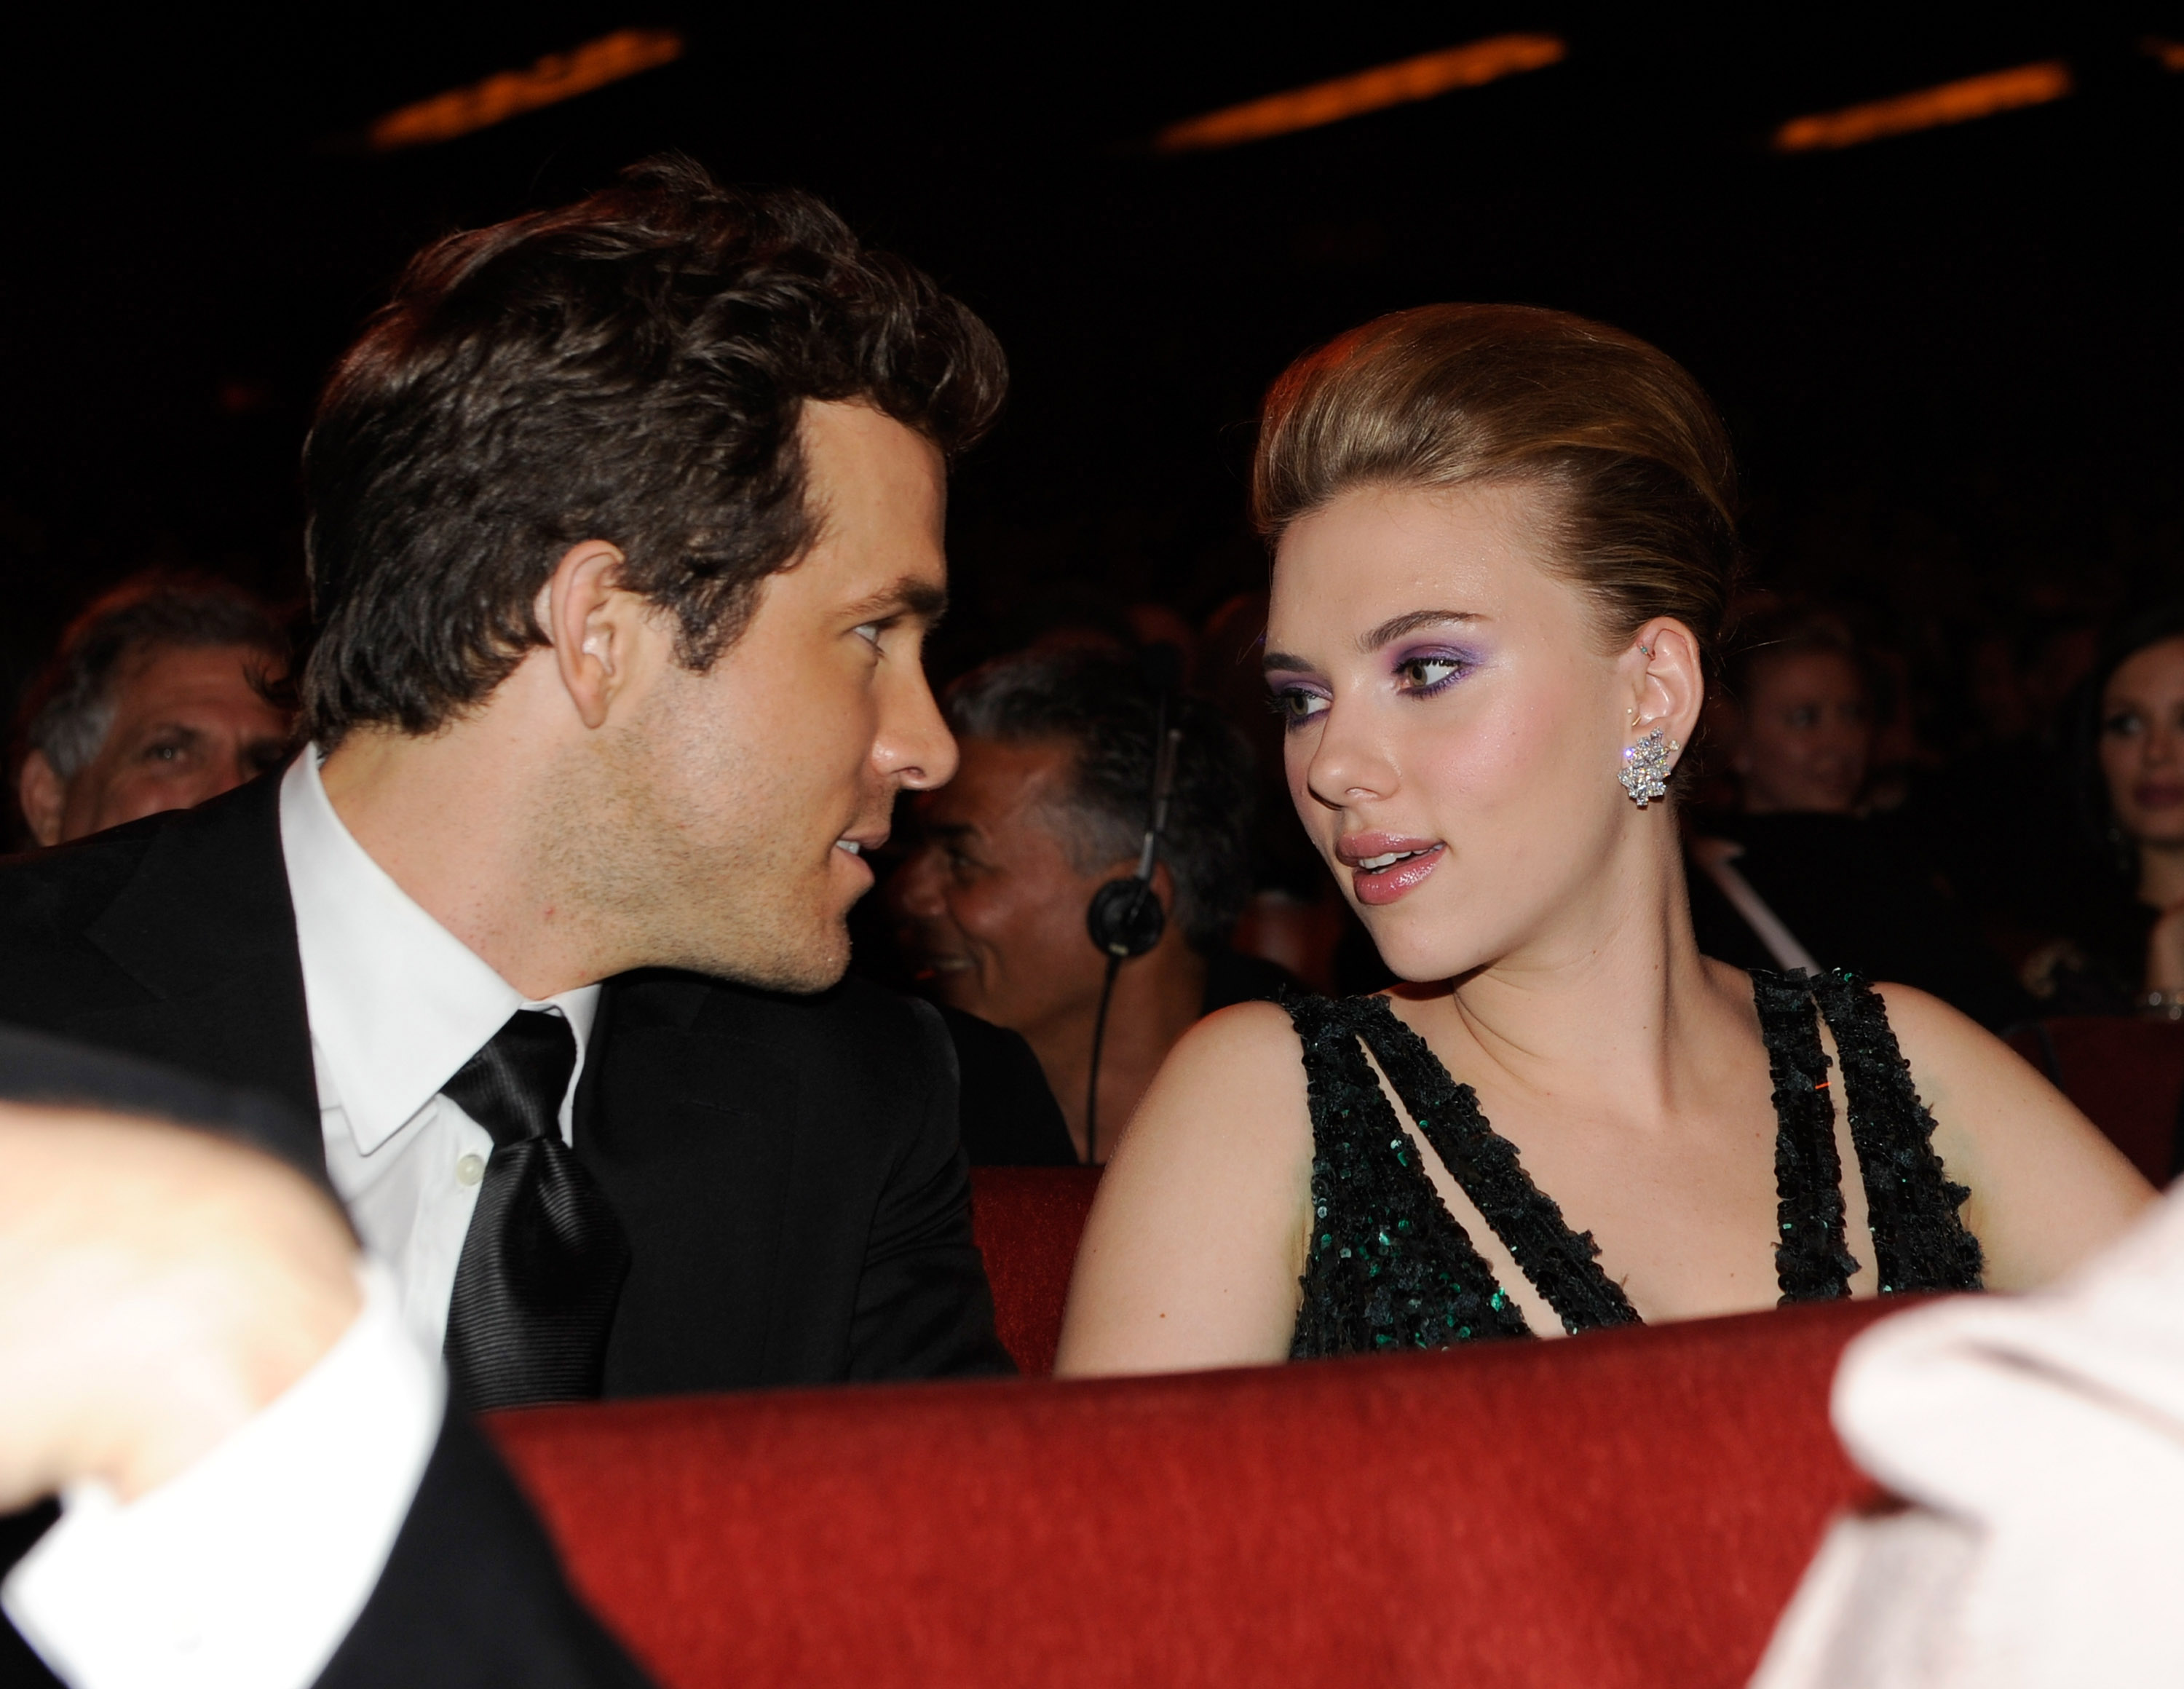 Ryan Reynolds and Scarlett Johansson in the audience at the 64th Annual Tony Awards, at Radio City Music Hall on June 13, 2010, in New York City. | Source: Getty Images